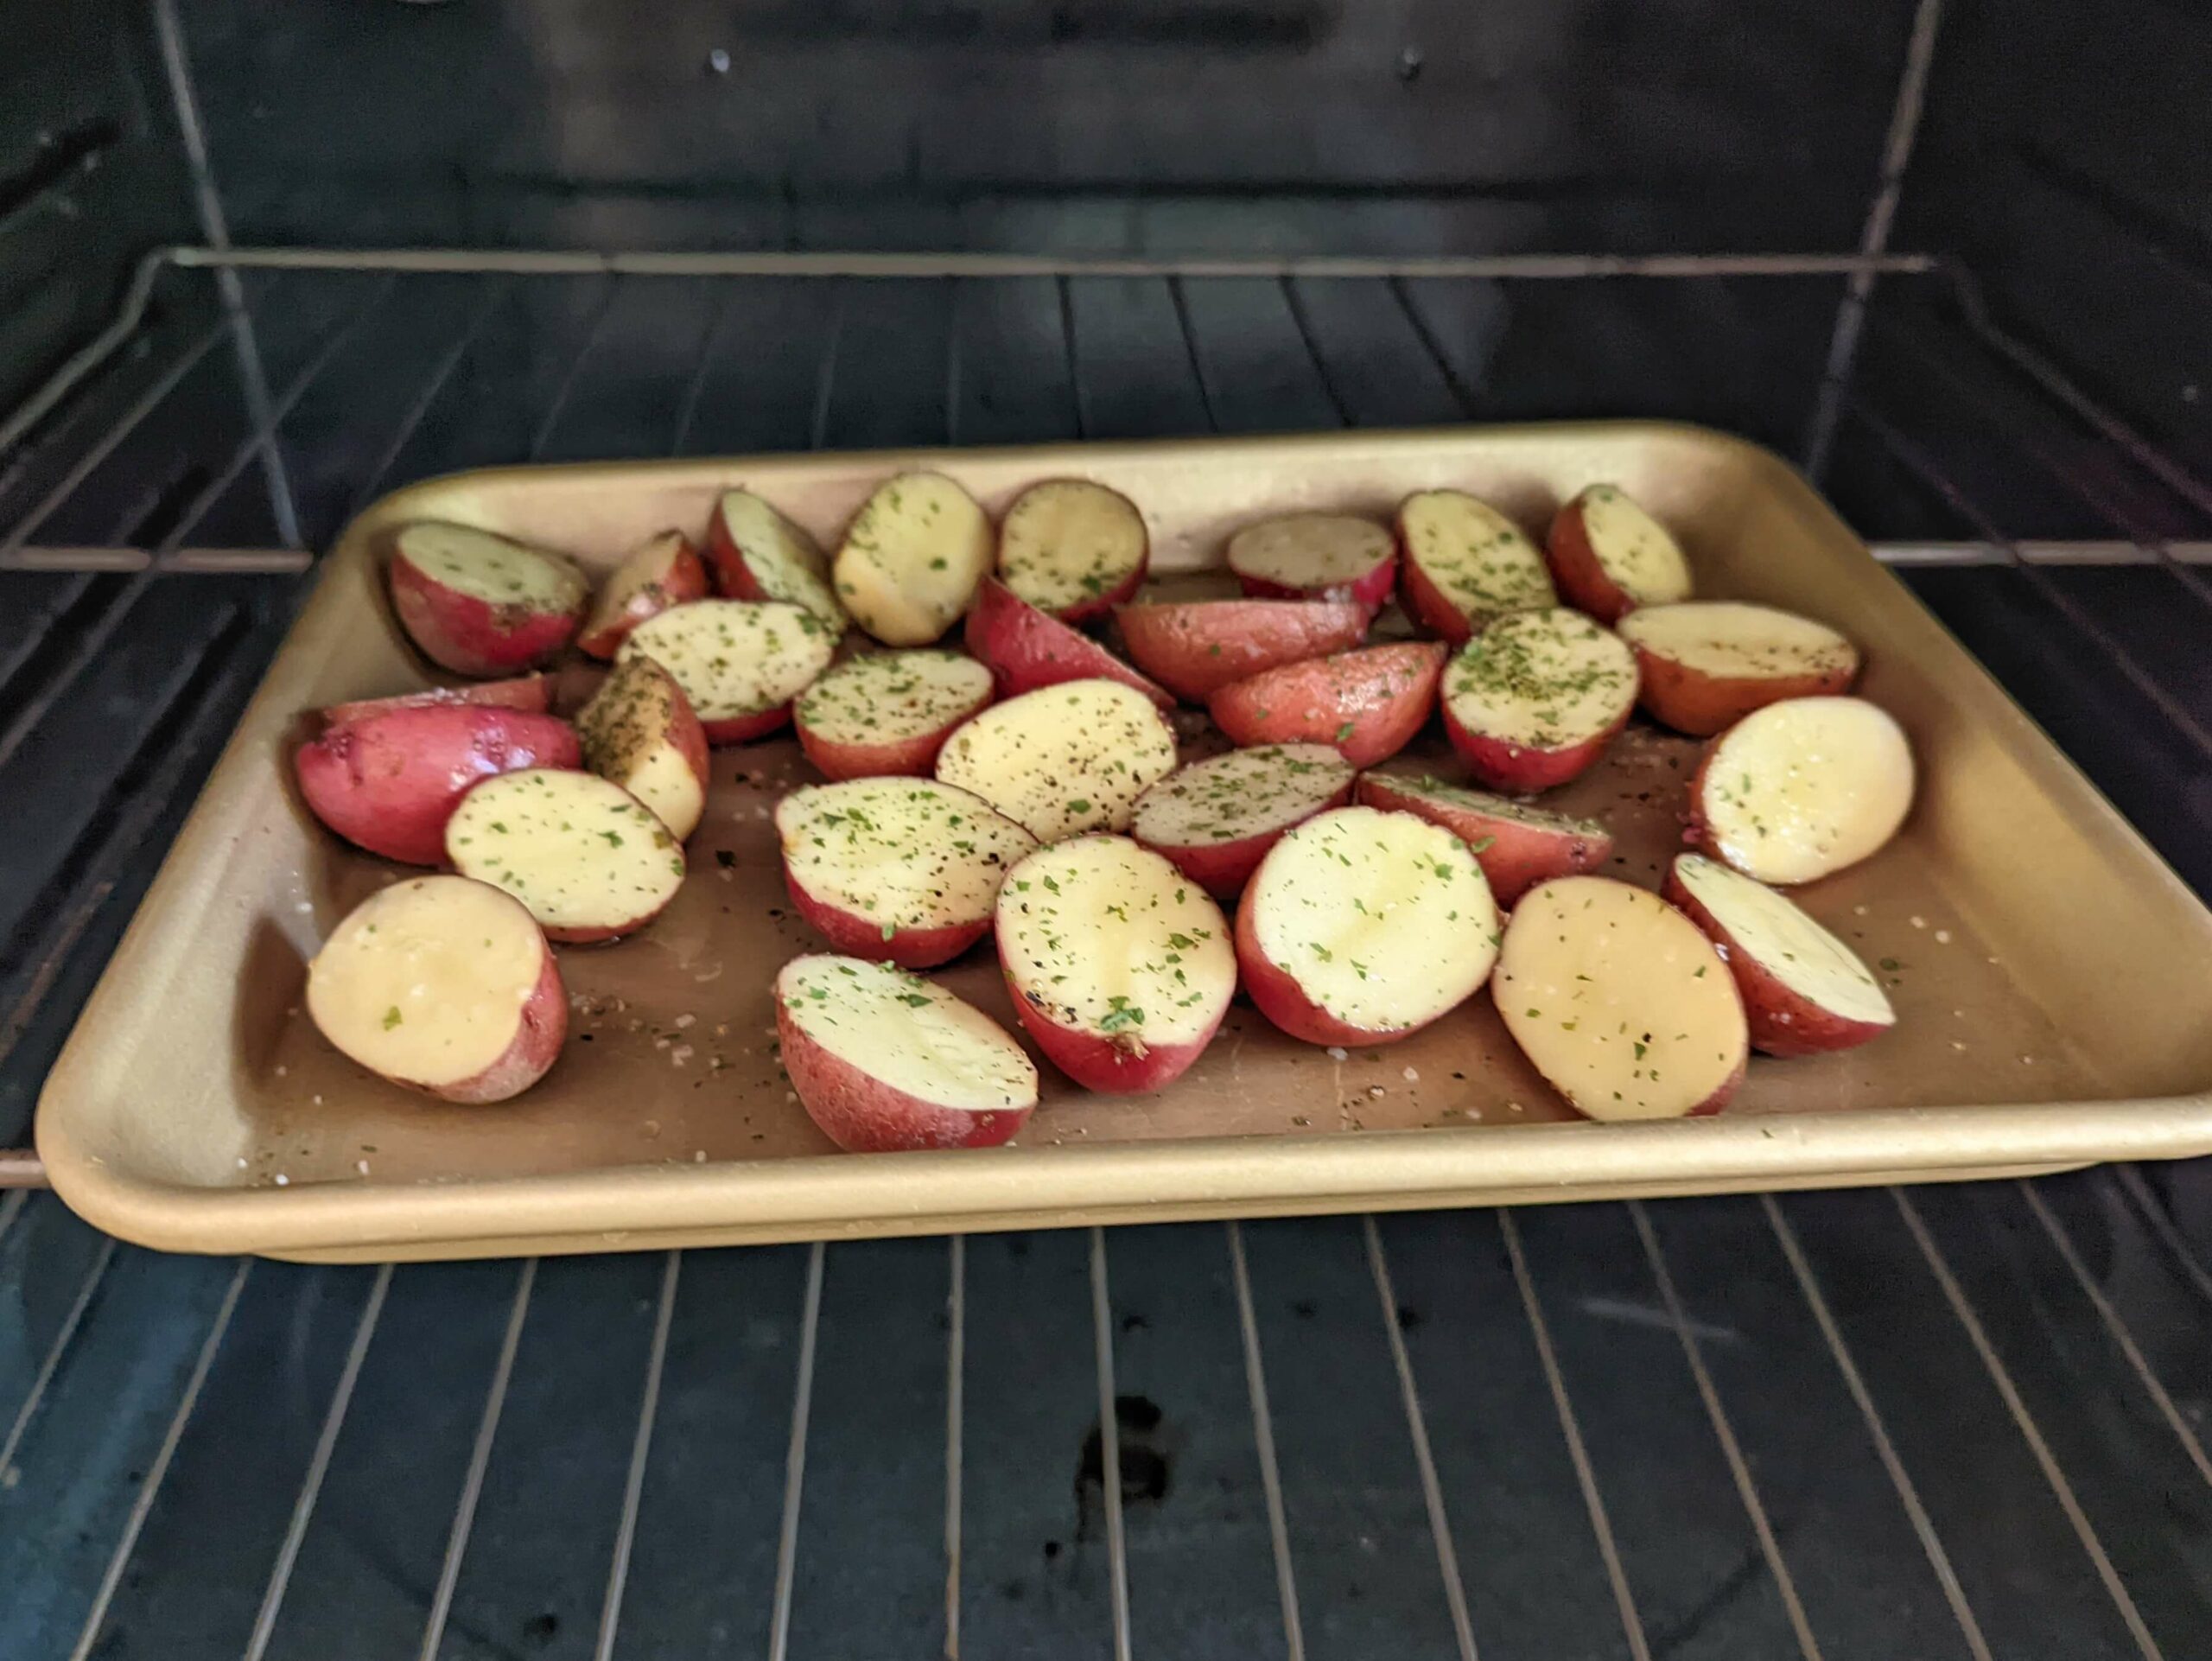 Yukon gold potatoes on a rimmed baking sheet in the oven.